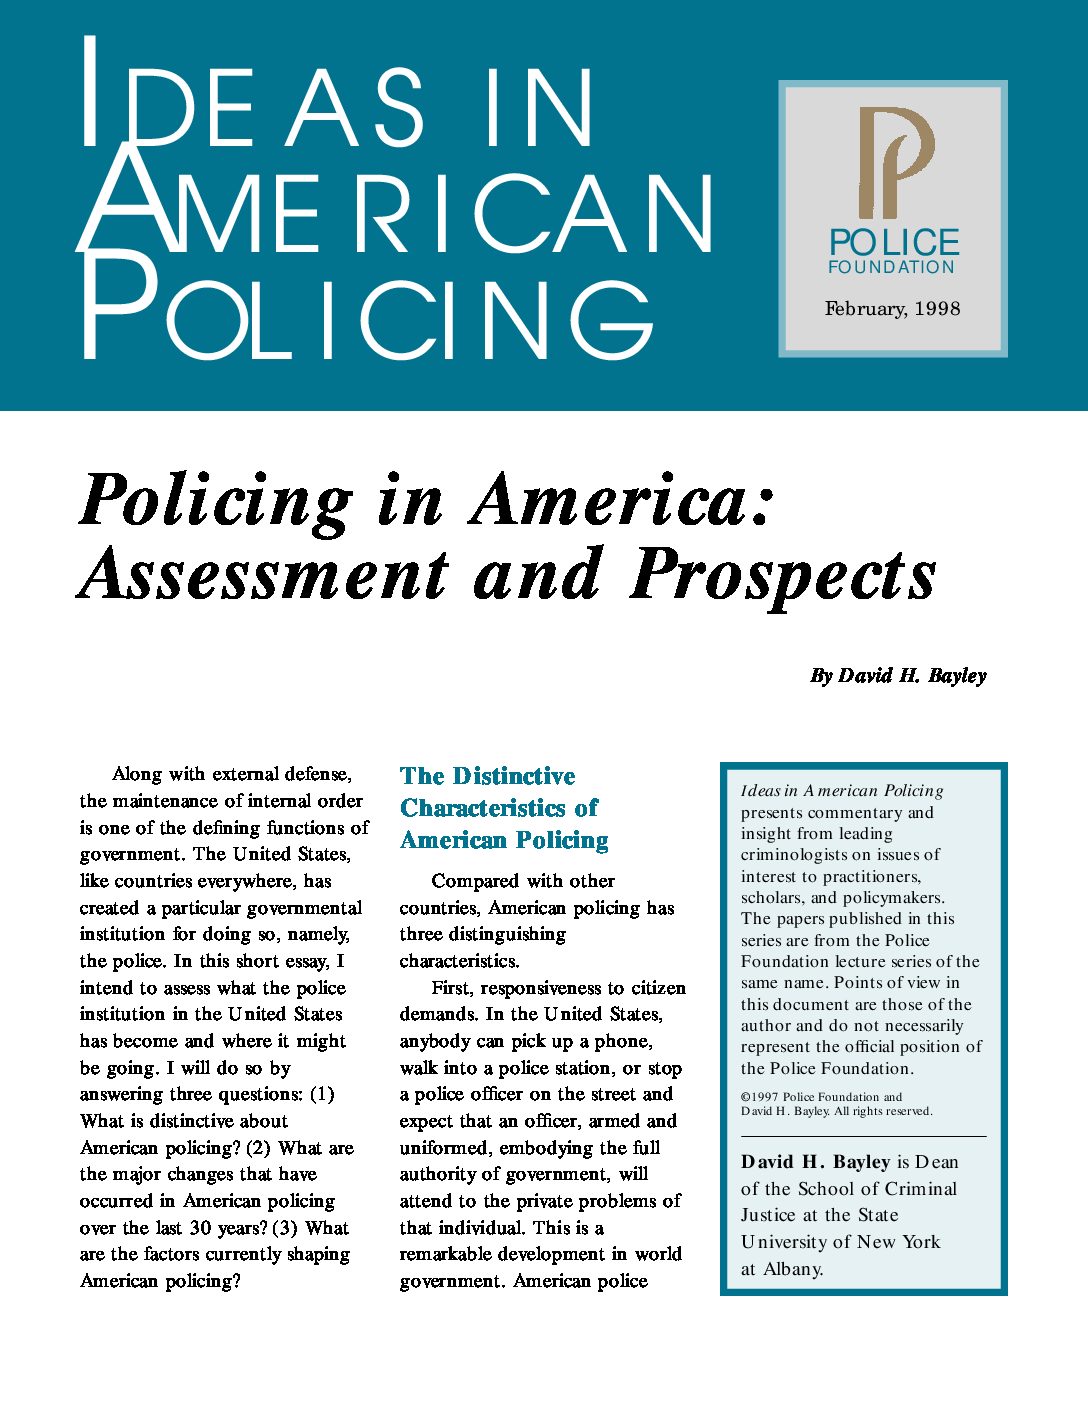 Bayley-1998-Policing-in-America-Assessment-and-Prospects-pdf